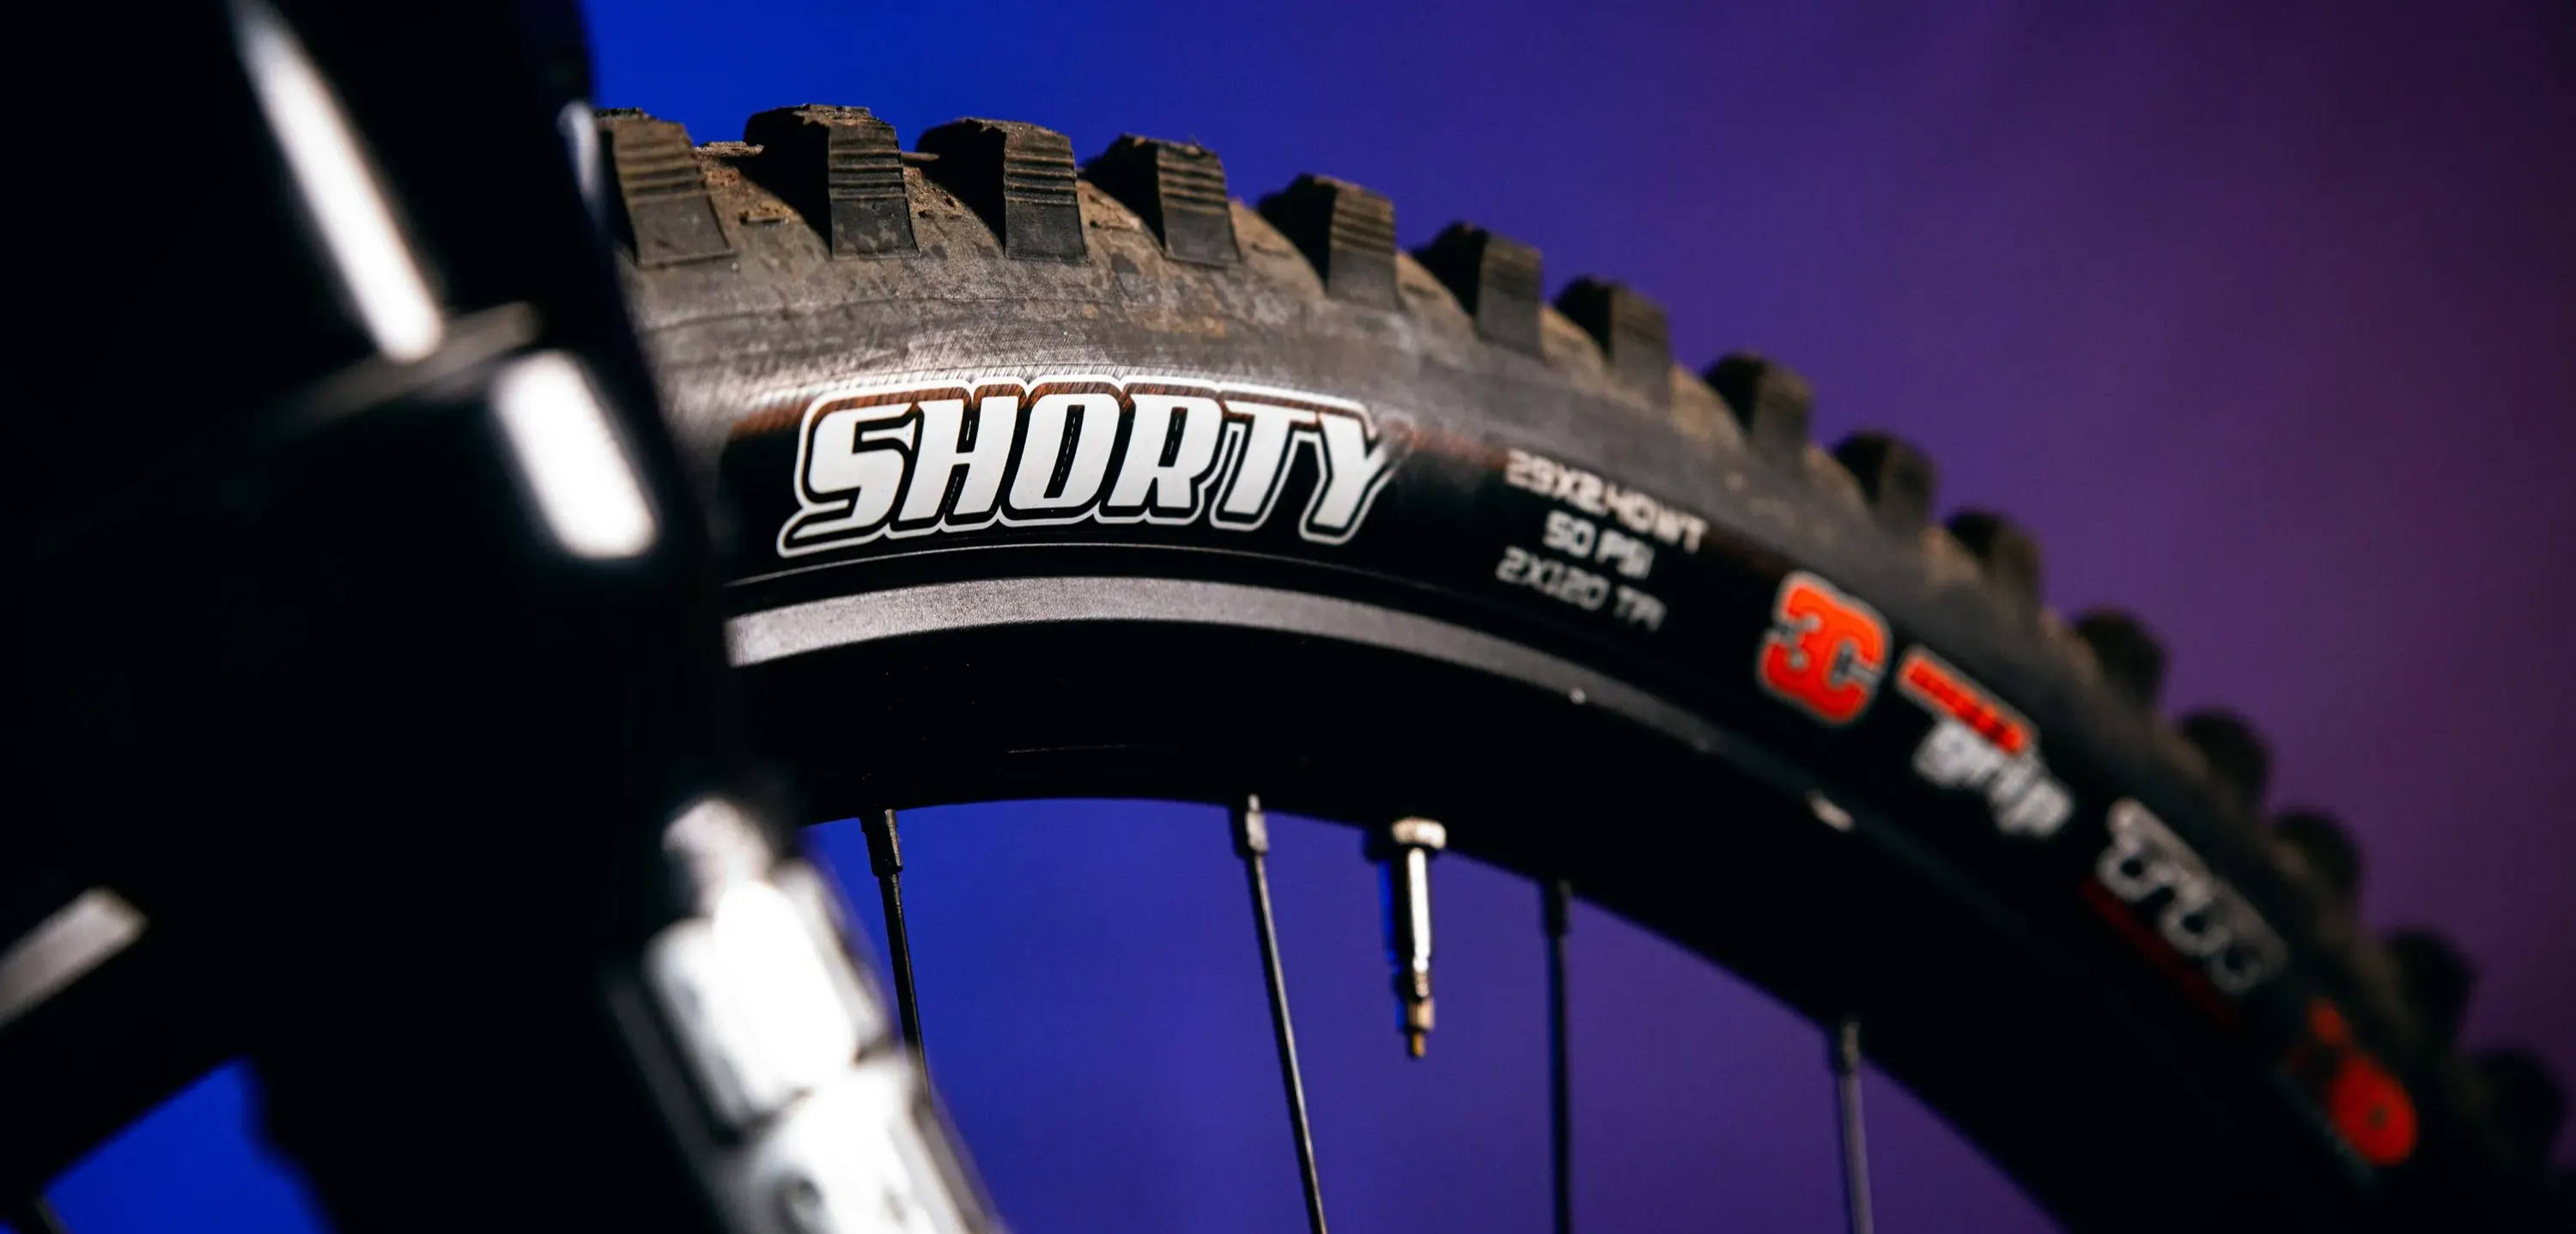 Maxxis Shorty mountain bike tire on a colored background